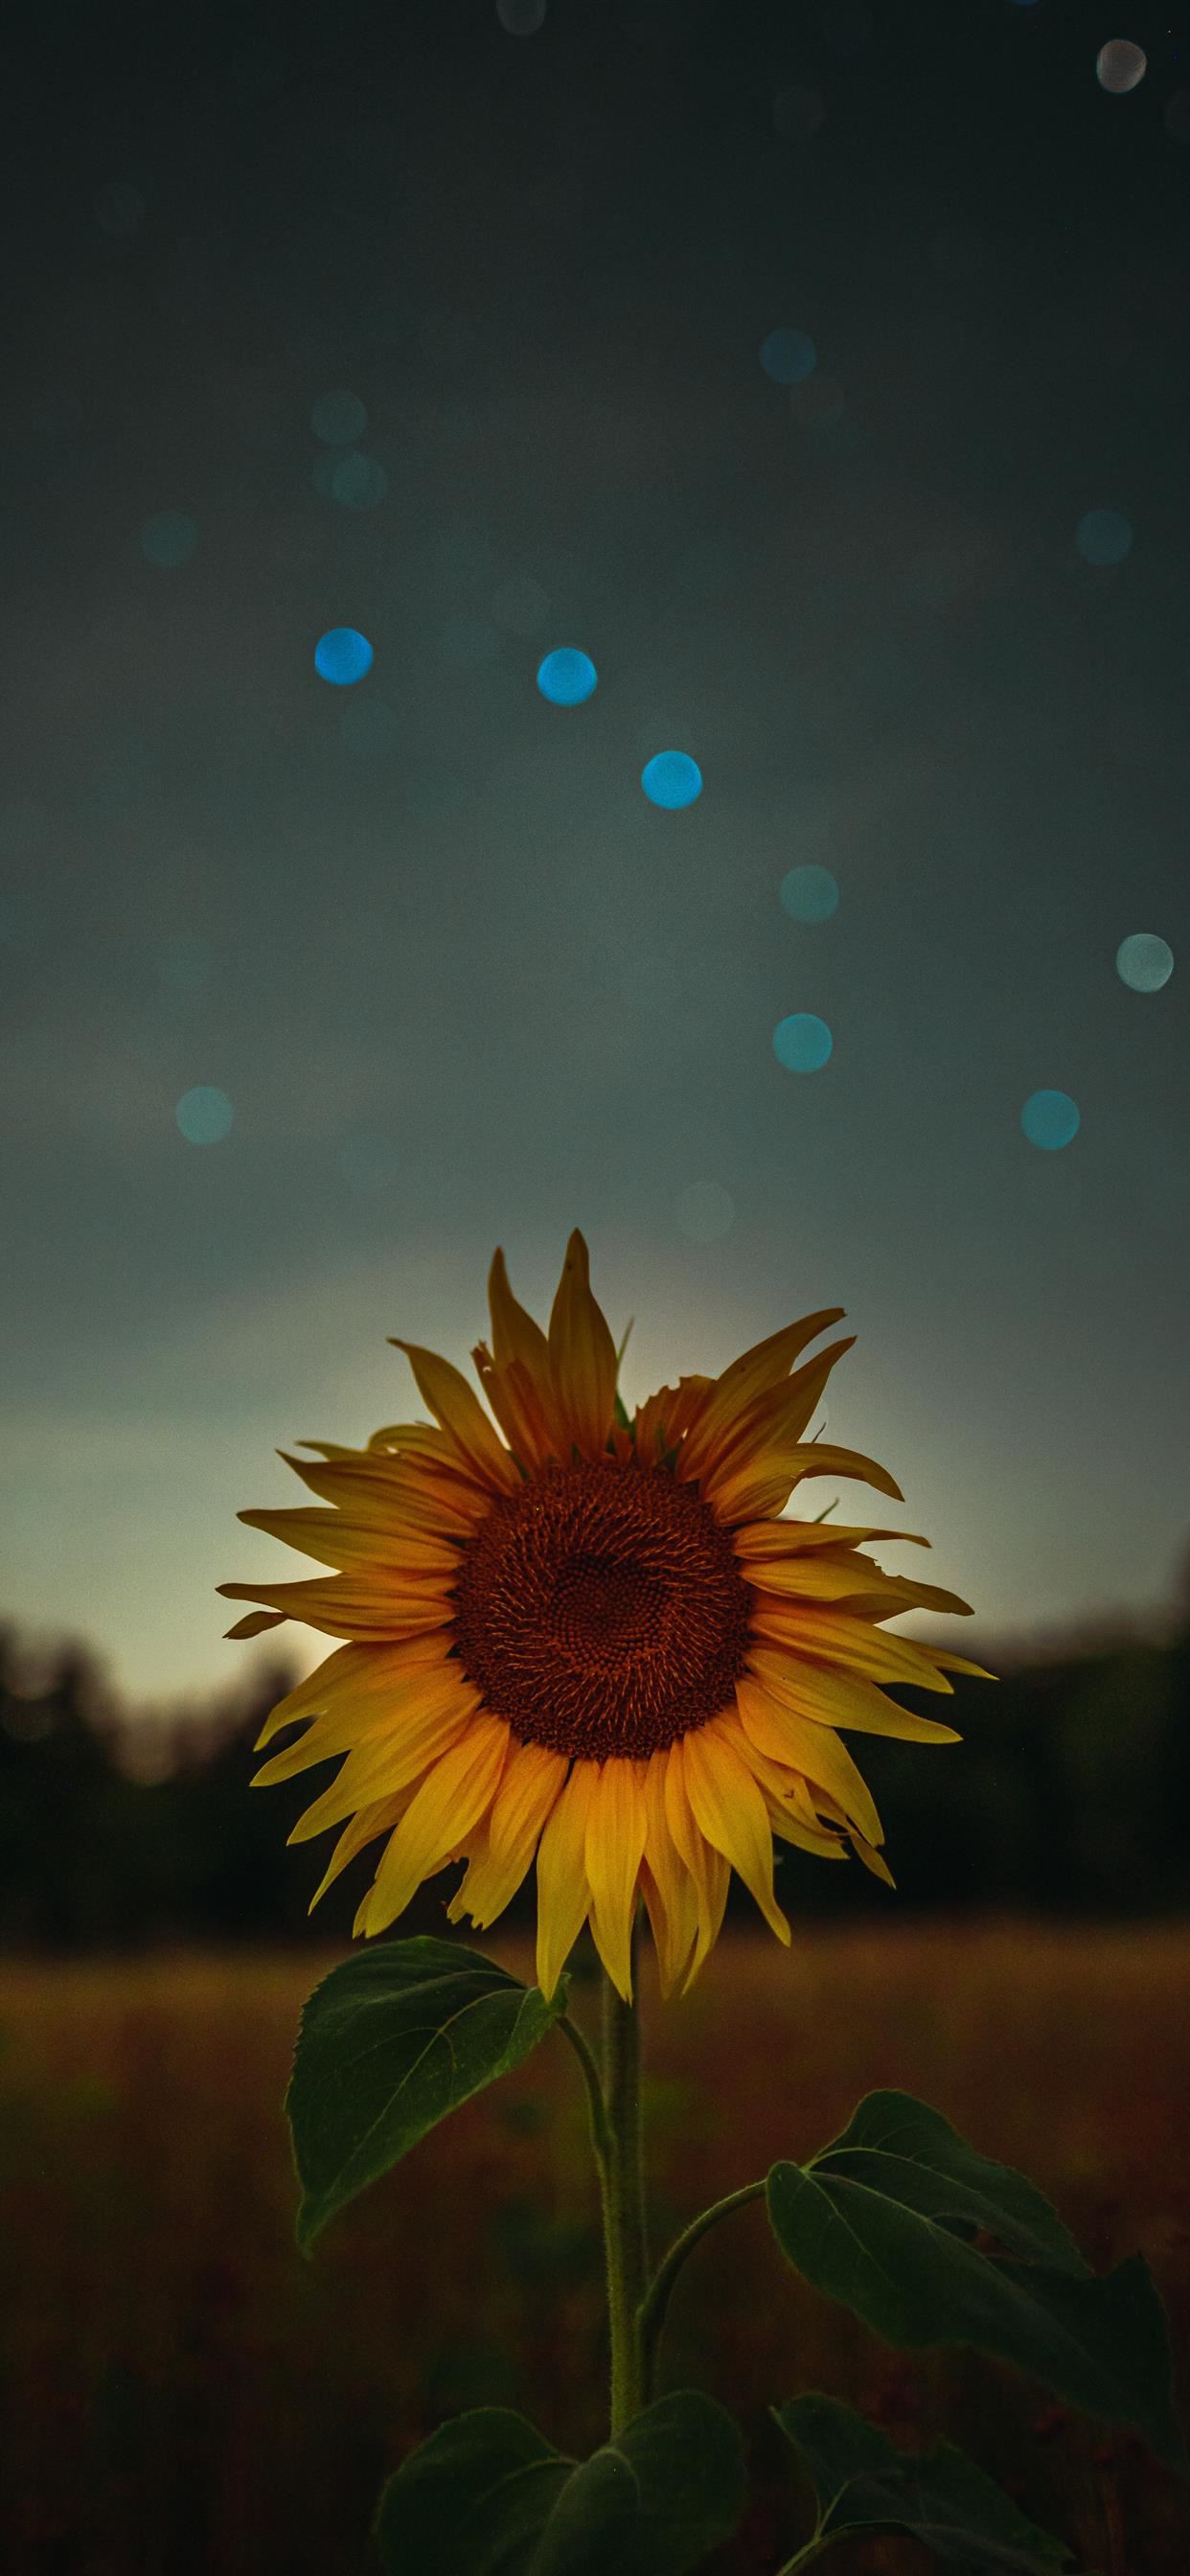 Download Enjoy the beauty of sunshine and sunshine with this vibrant  sunflower aesthetic iPhone wallpaper Wallpaper | Wallpapers.com